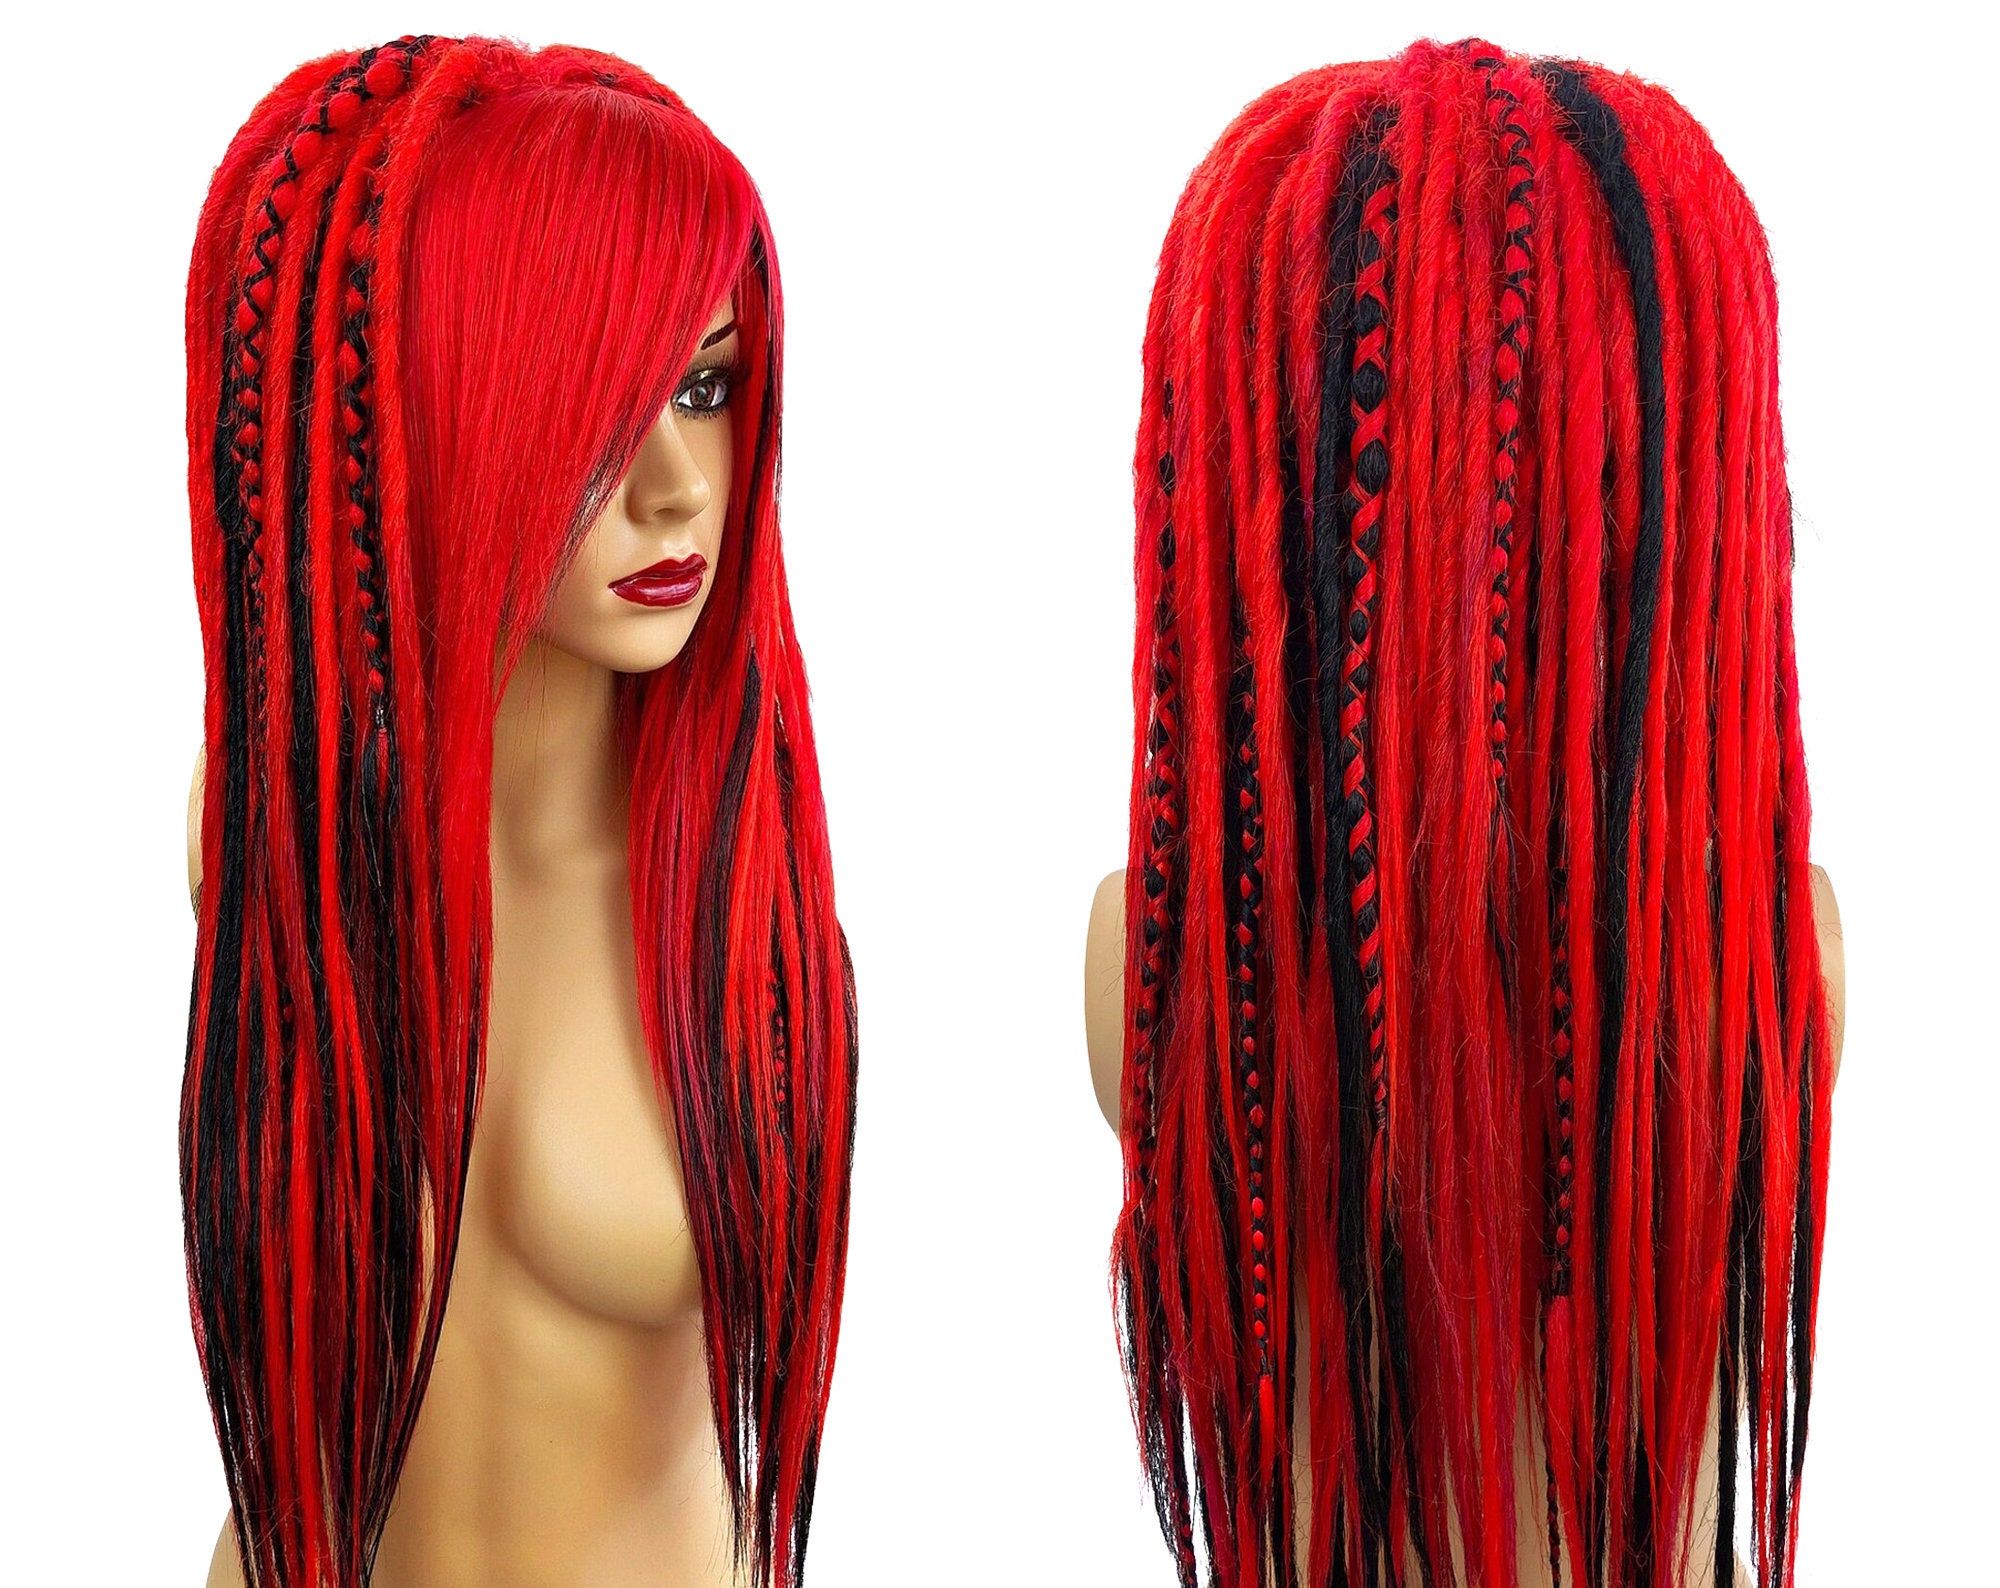 Red & Black Full Synthetic Dreads Wig. 18 20 Inches One